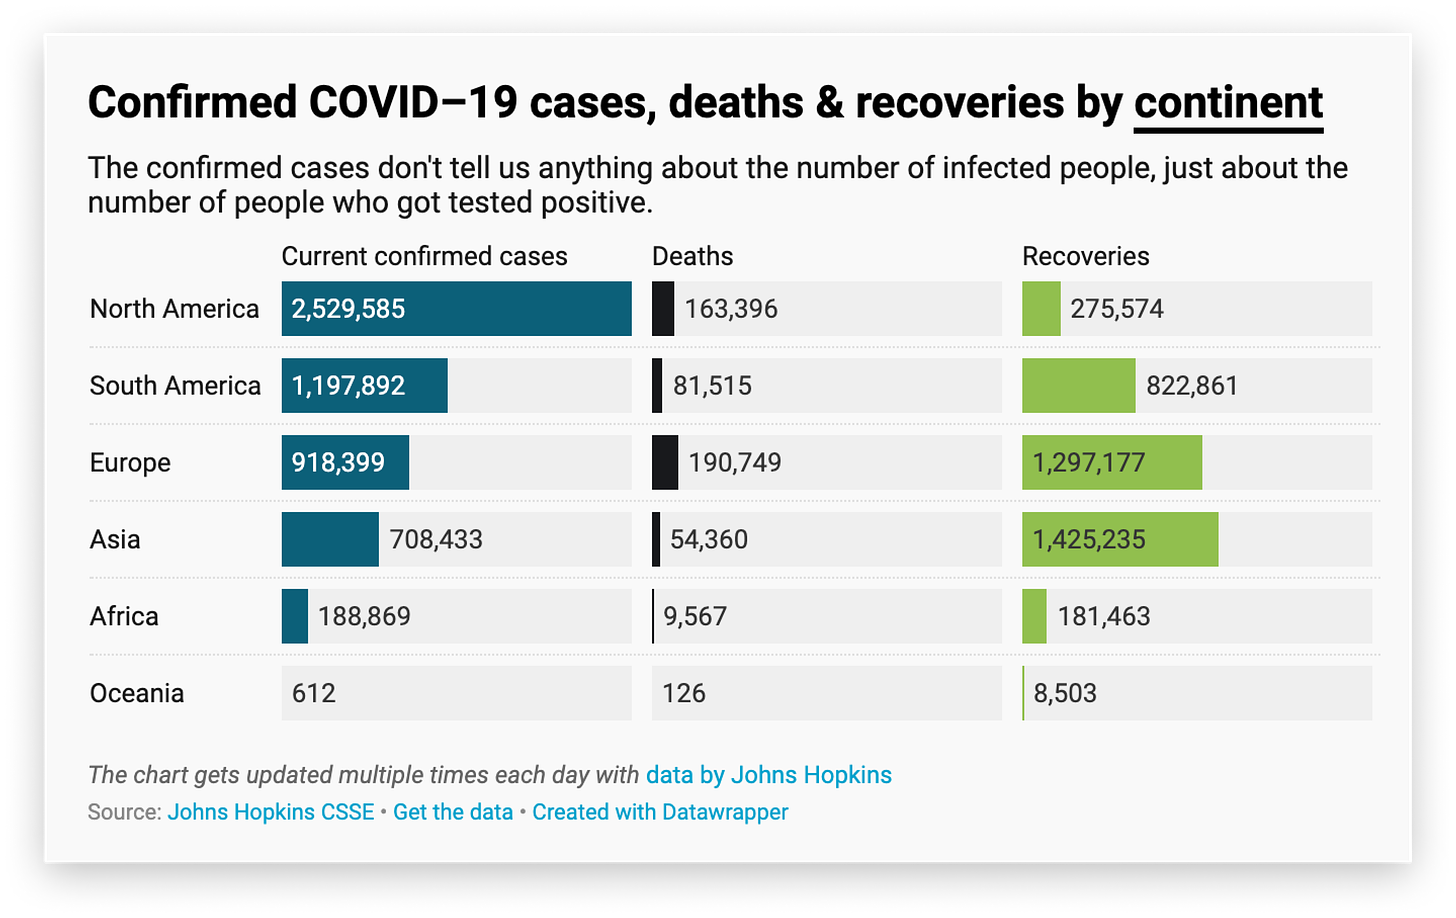 A visualisation that shows the number of current confirmed cases, deaths and recoveries from Covid-19. The chart dates back to early 2020.